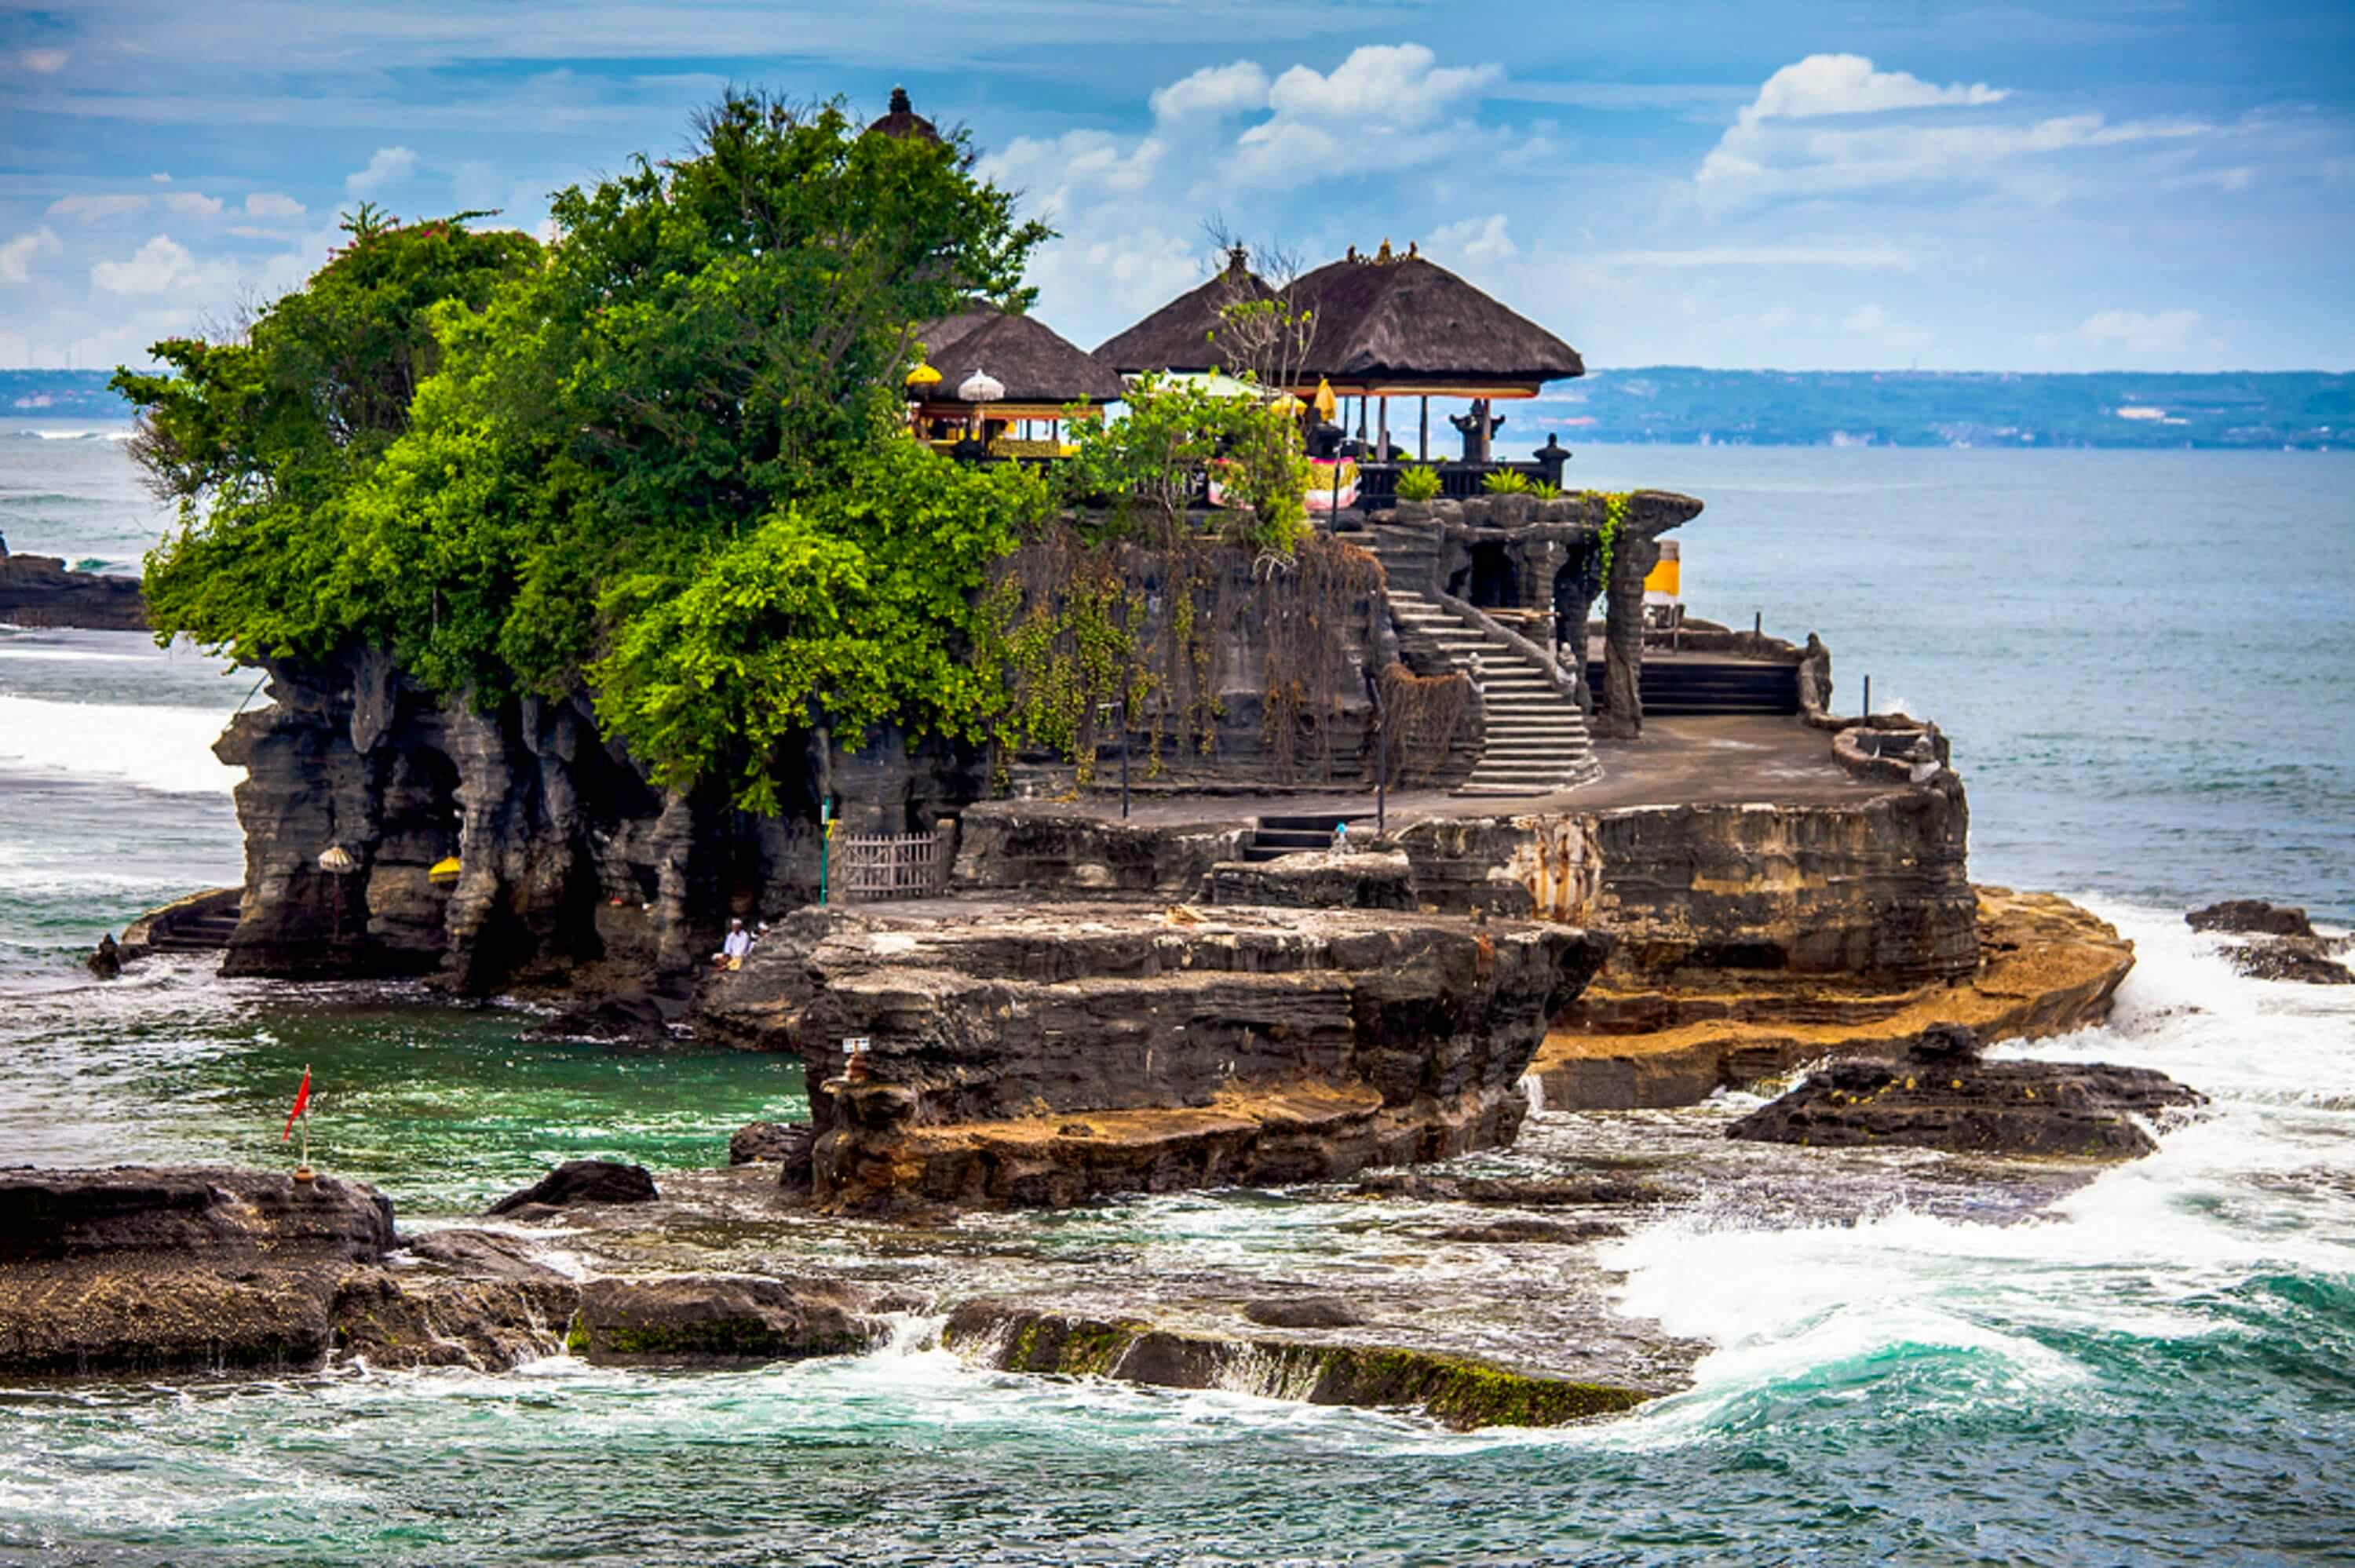 Tanah Lot Sunset Tour with complimentary Photoshoot of 30 Minutes